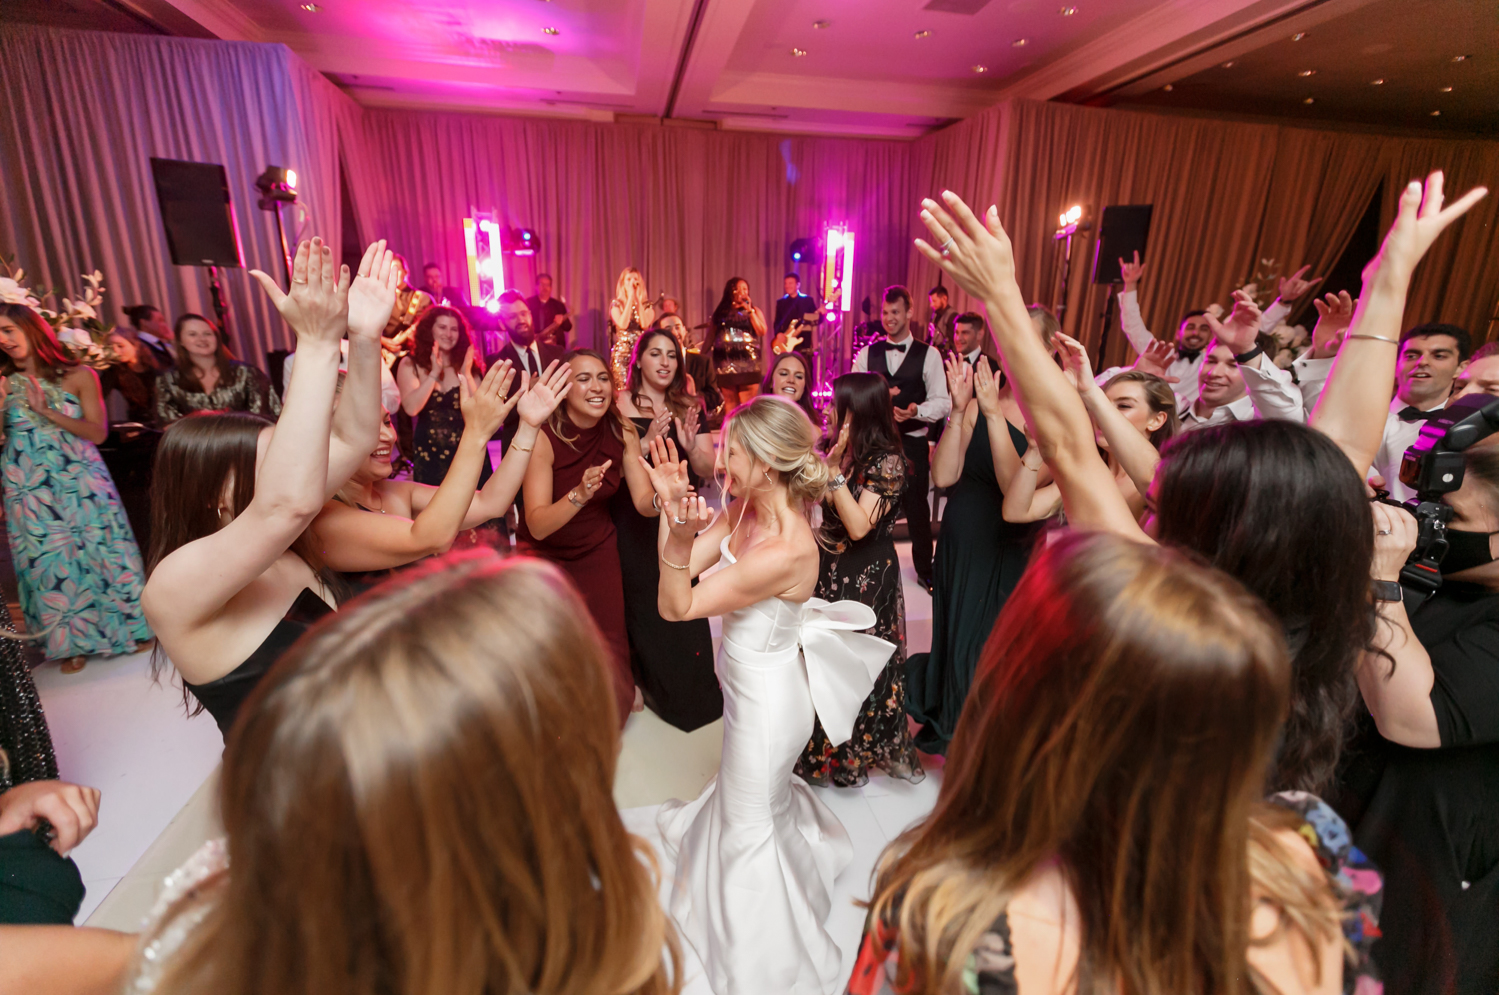 The bride dances as her friends circle around her, clap, and cheer her on